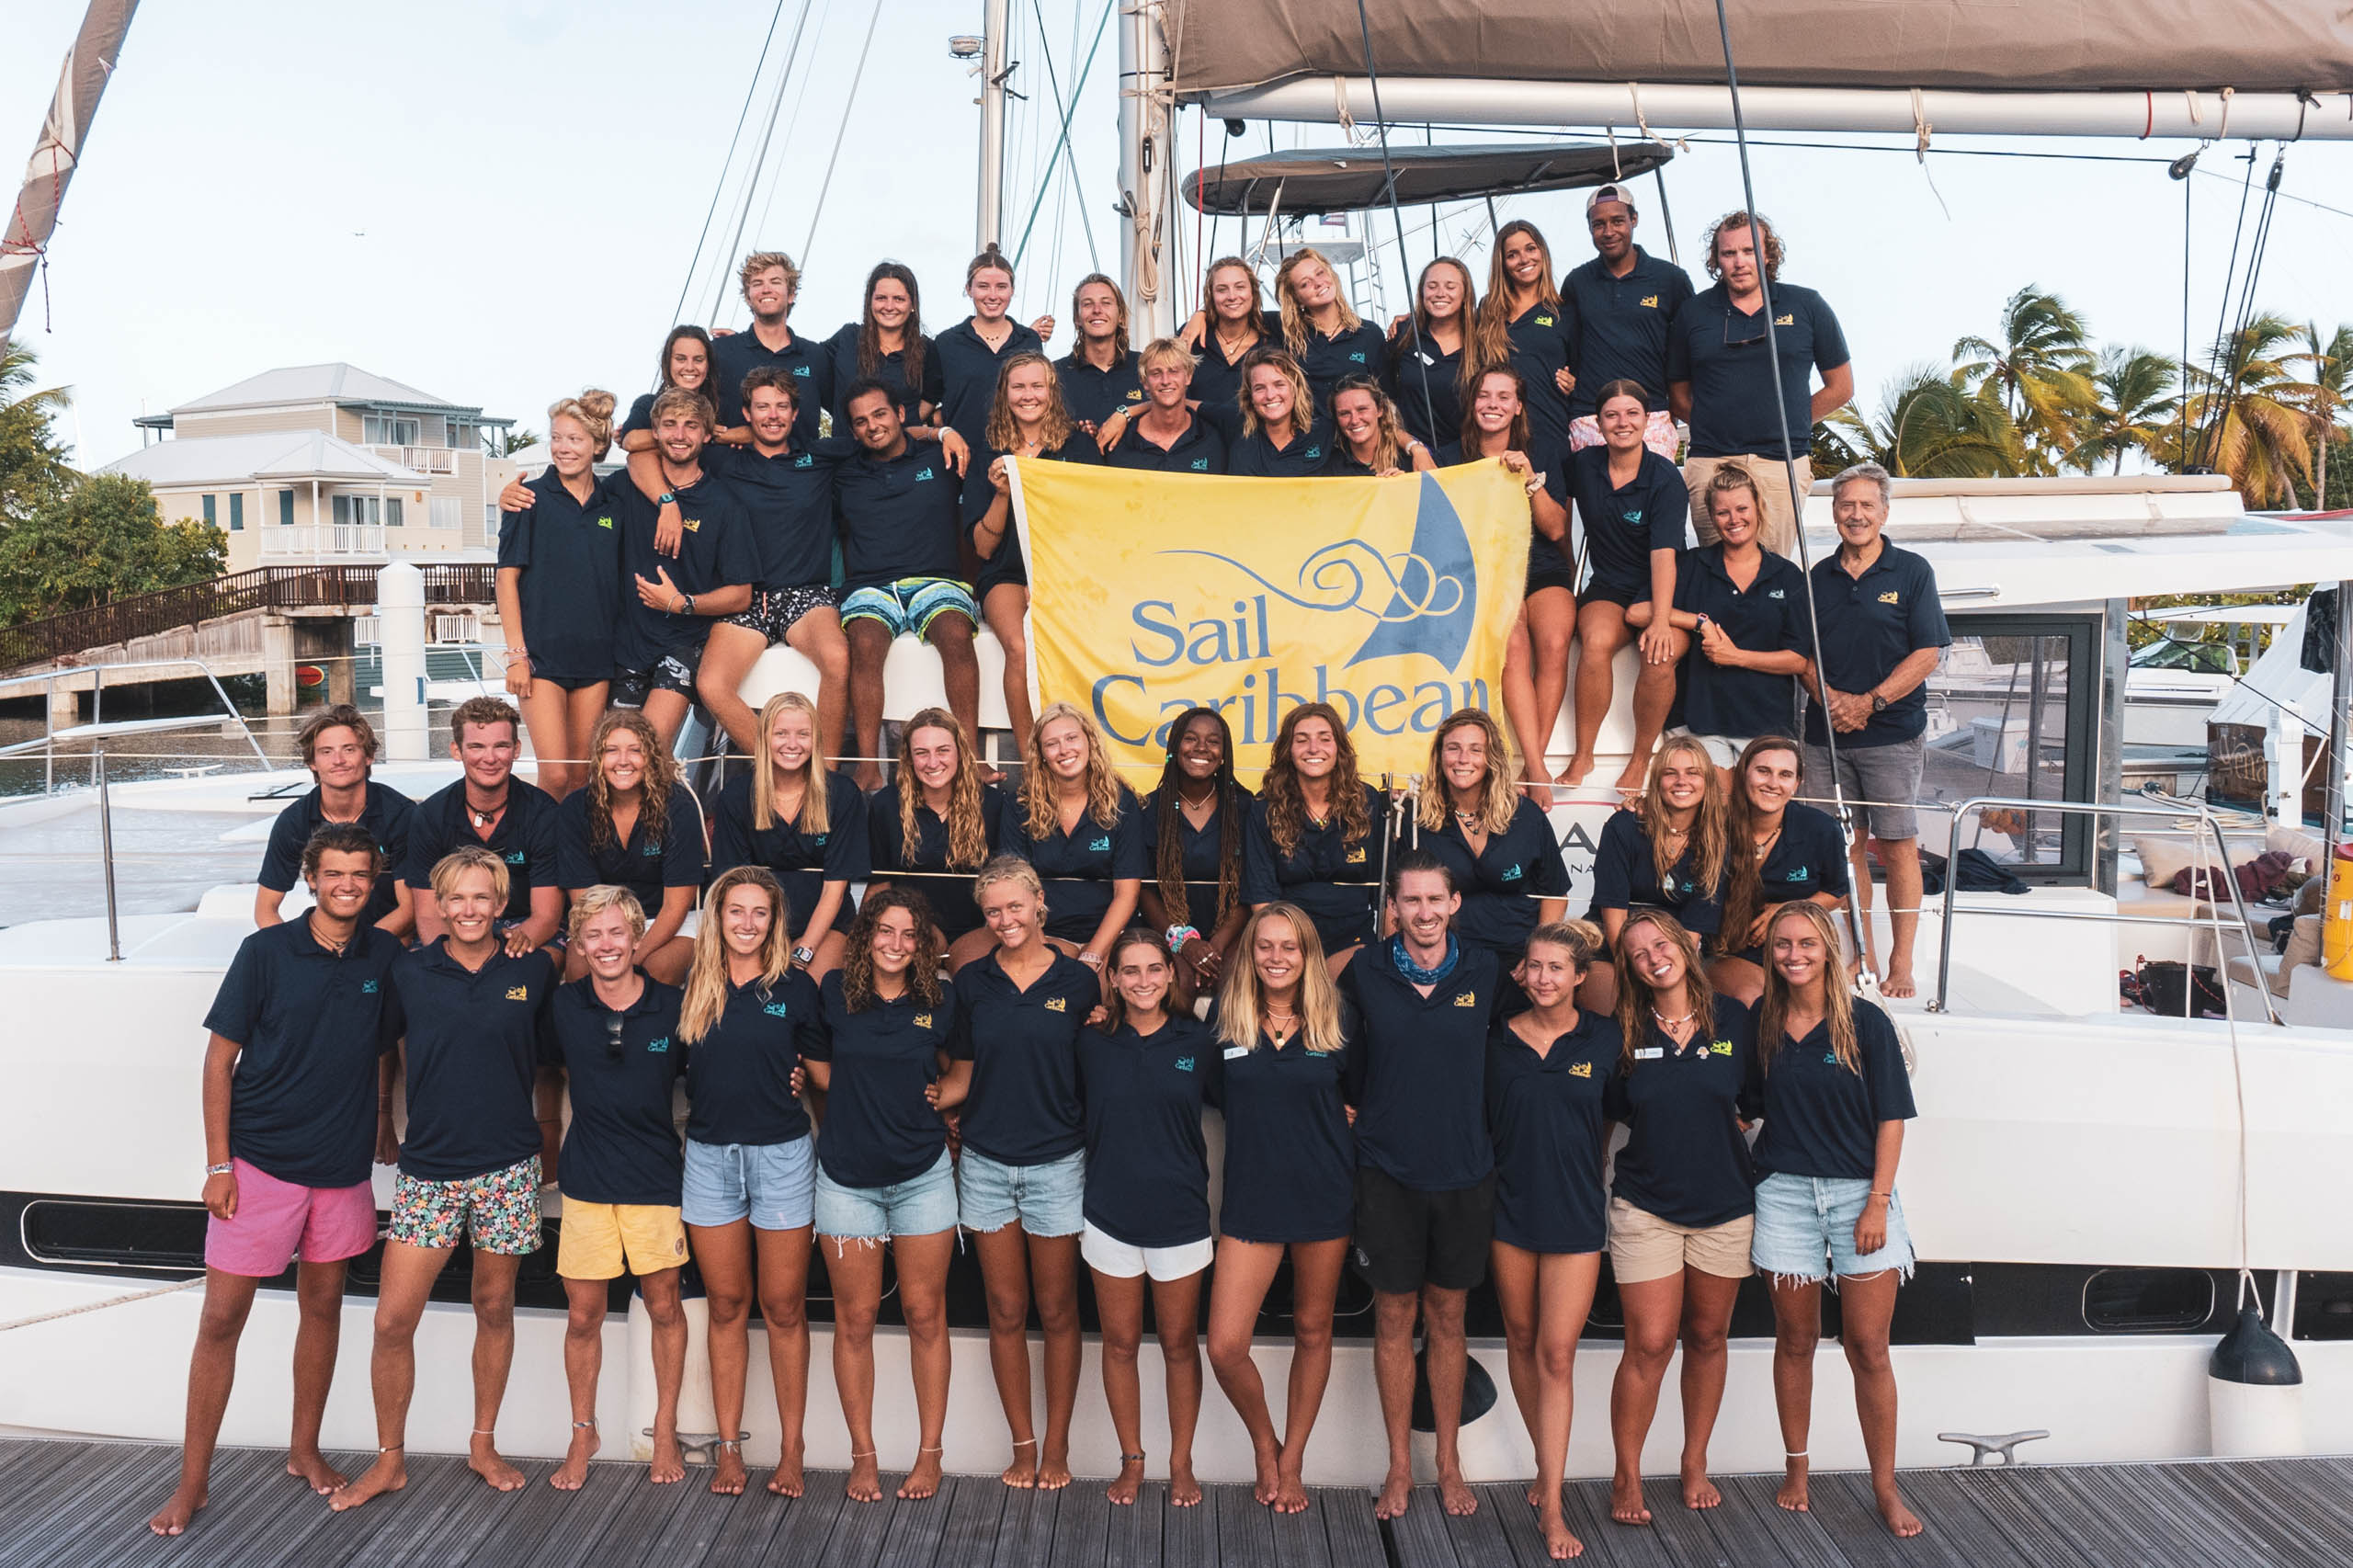 A group of Sail Caribbean staff members posing for a photo on a sailboat.